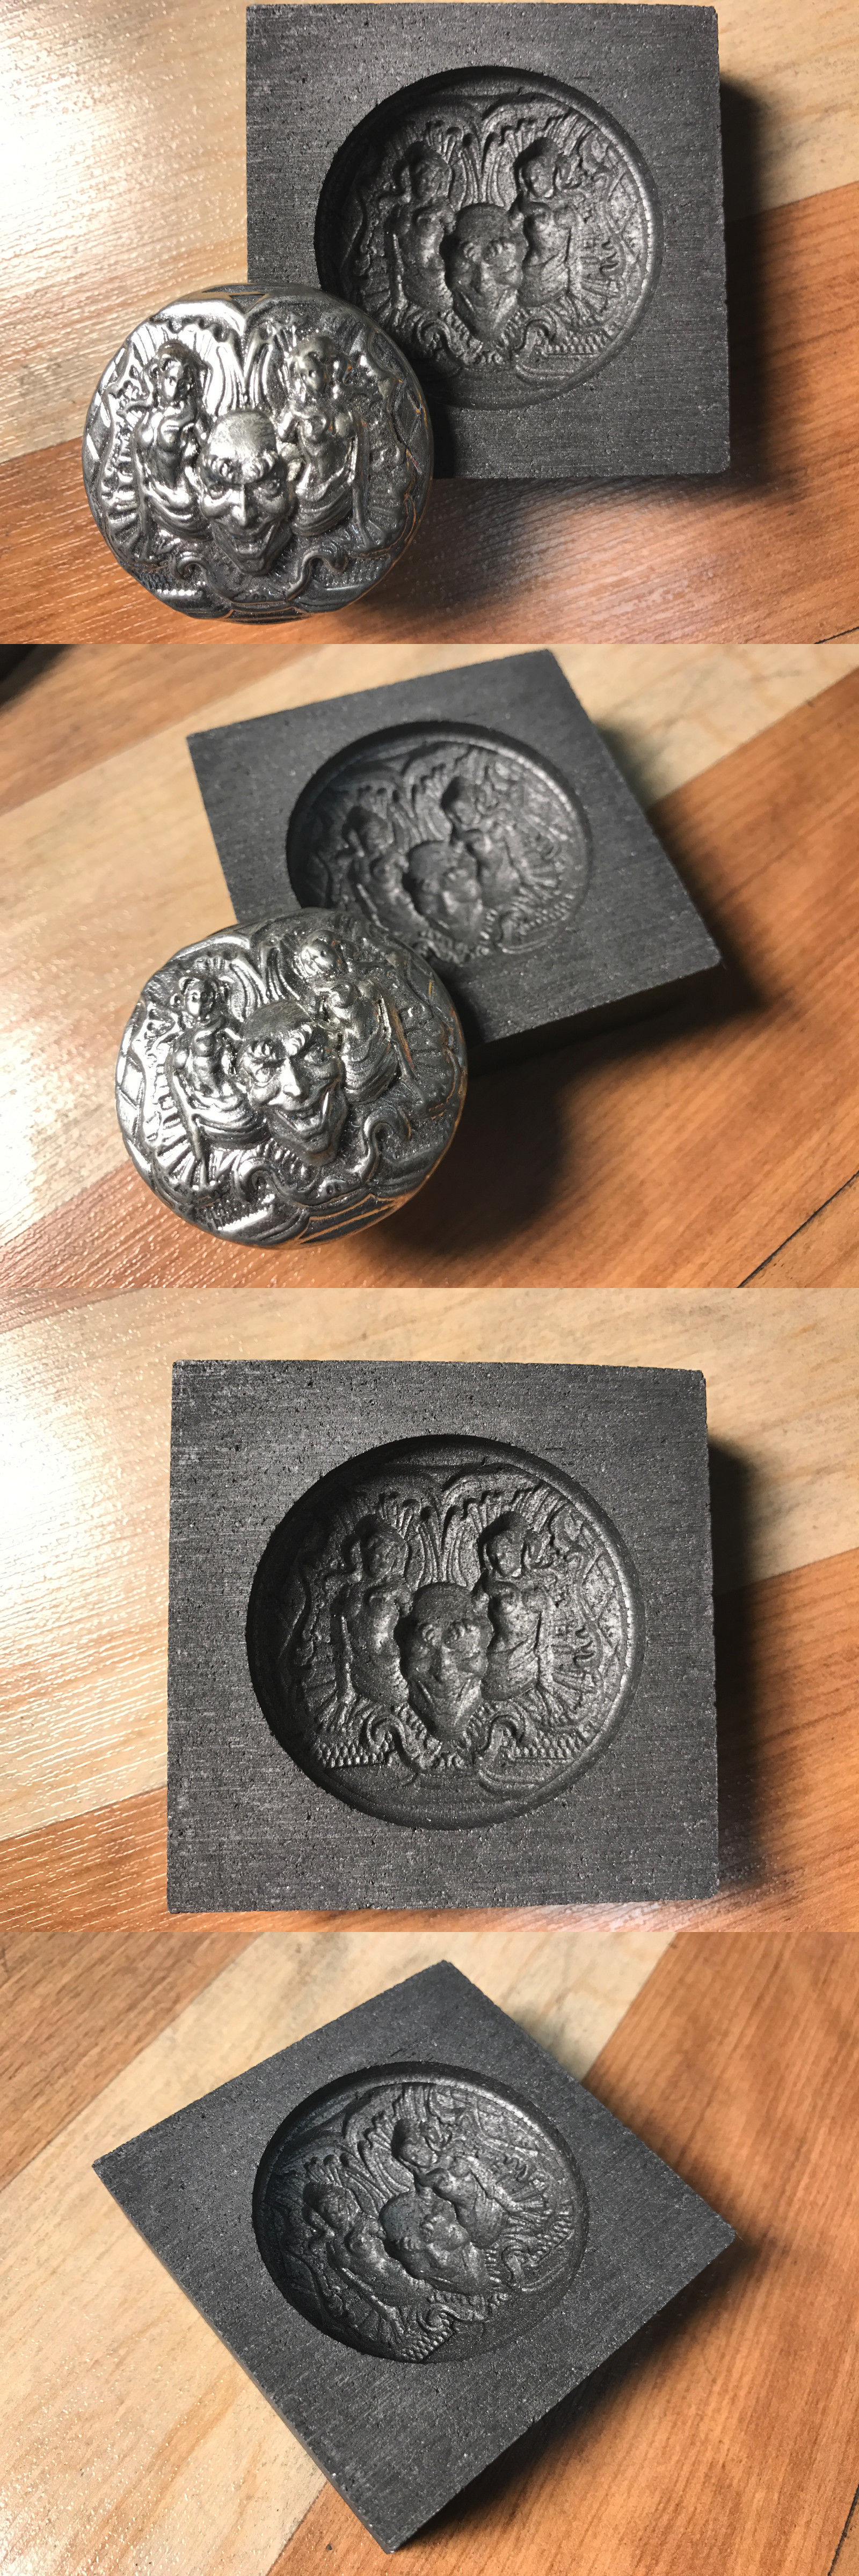 Jewelry Molds 67711: Clown Coin Graphite Mold For Silver - Gold ...